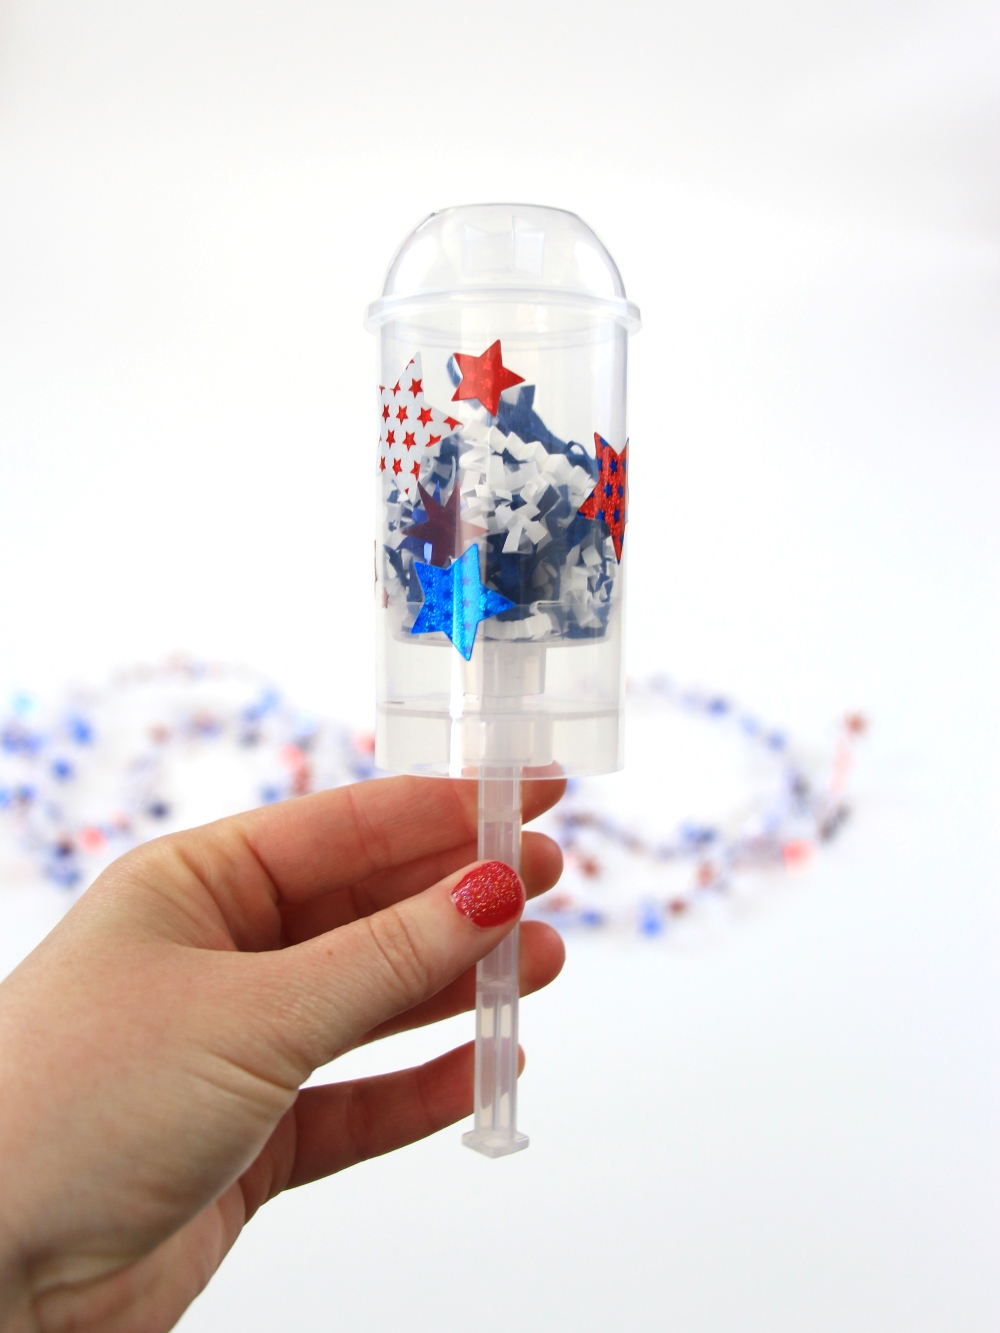 DIY Confetti Poppers are the perfect substitute for fireworks on the 4th of July. Just decorate, fill, and pop!